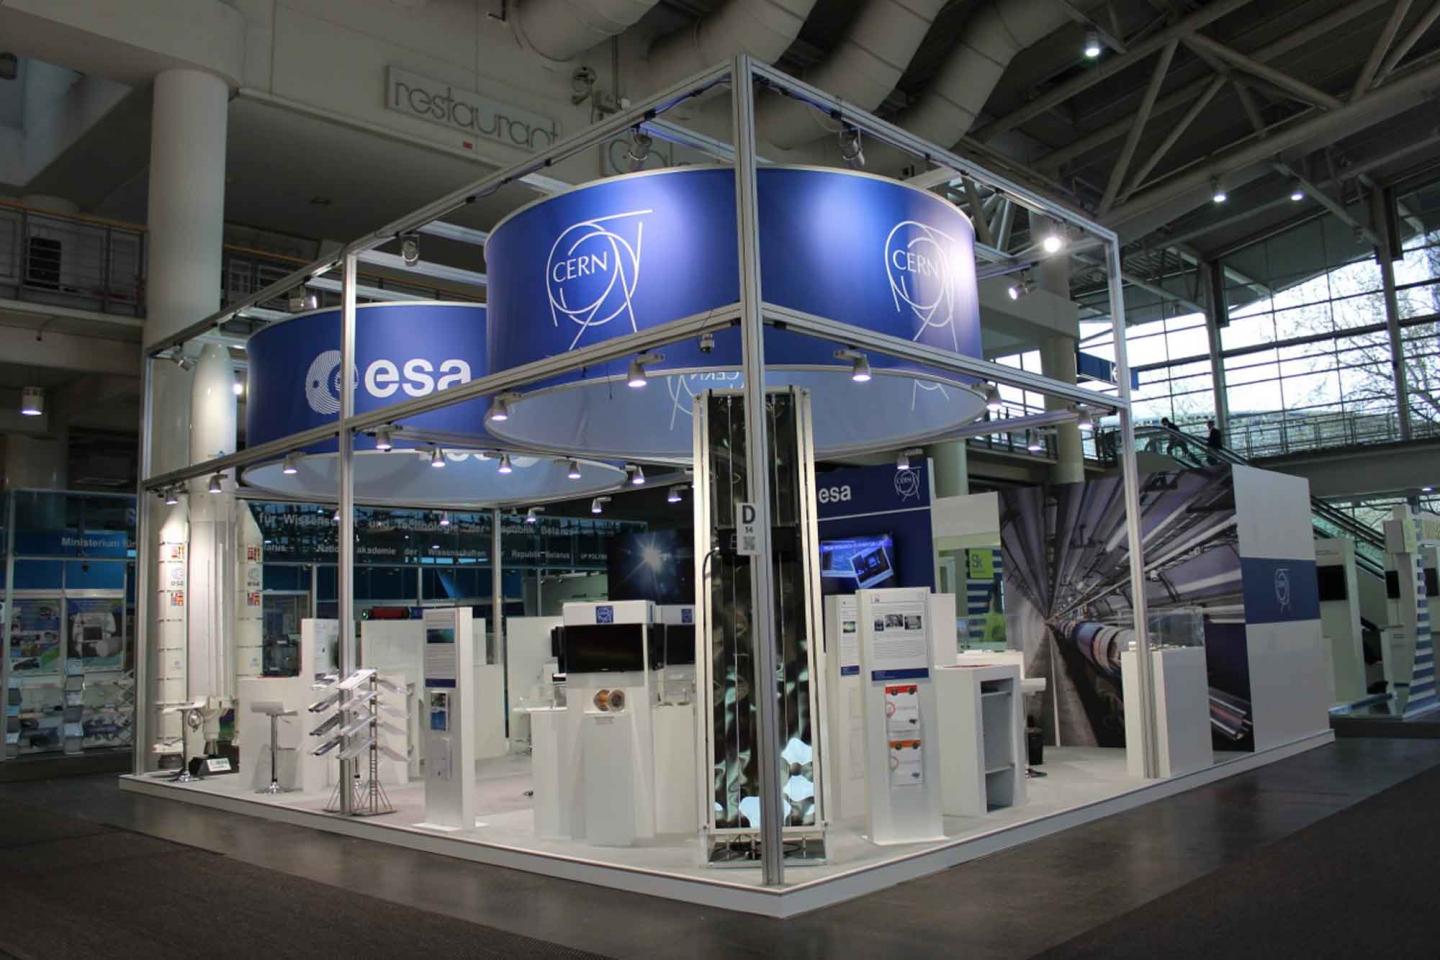 CERN and ESA join forces at Hannover Messe Industrial Fair